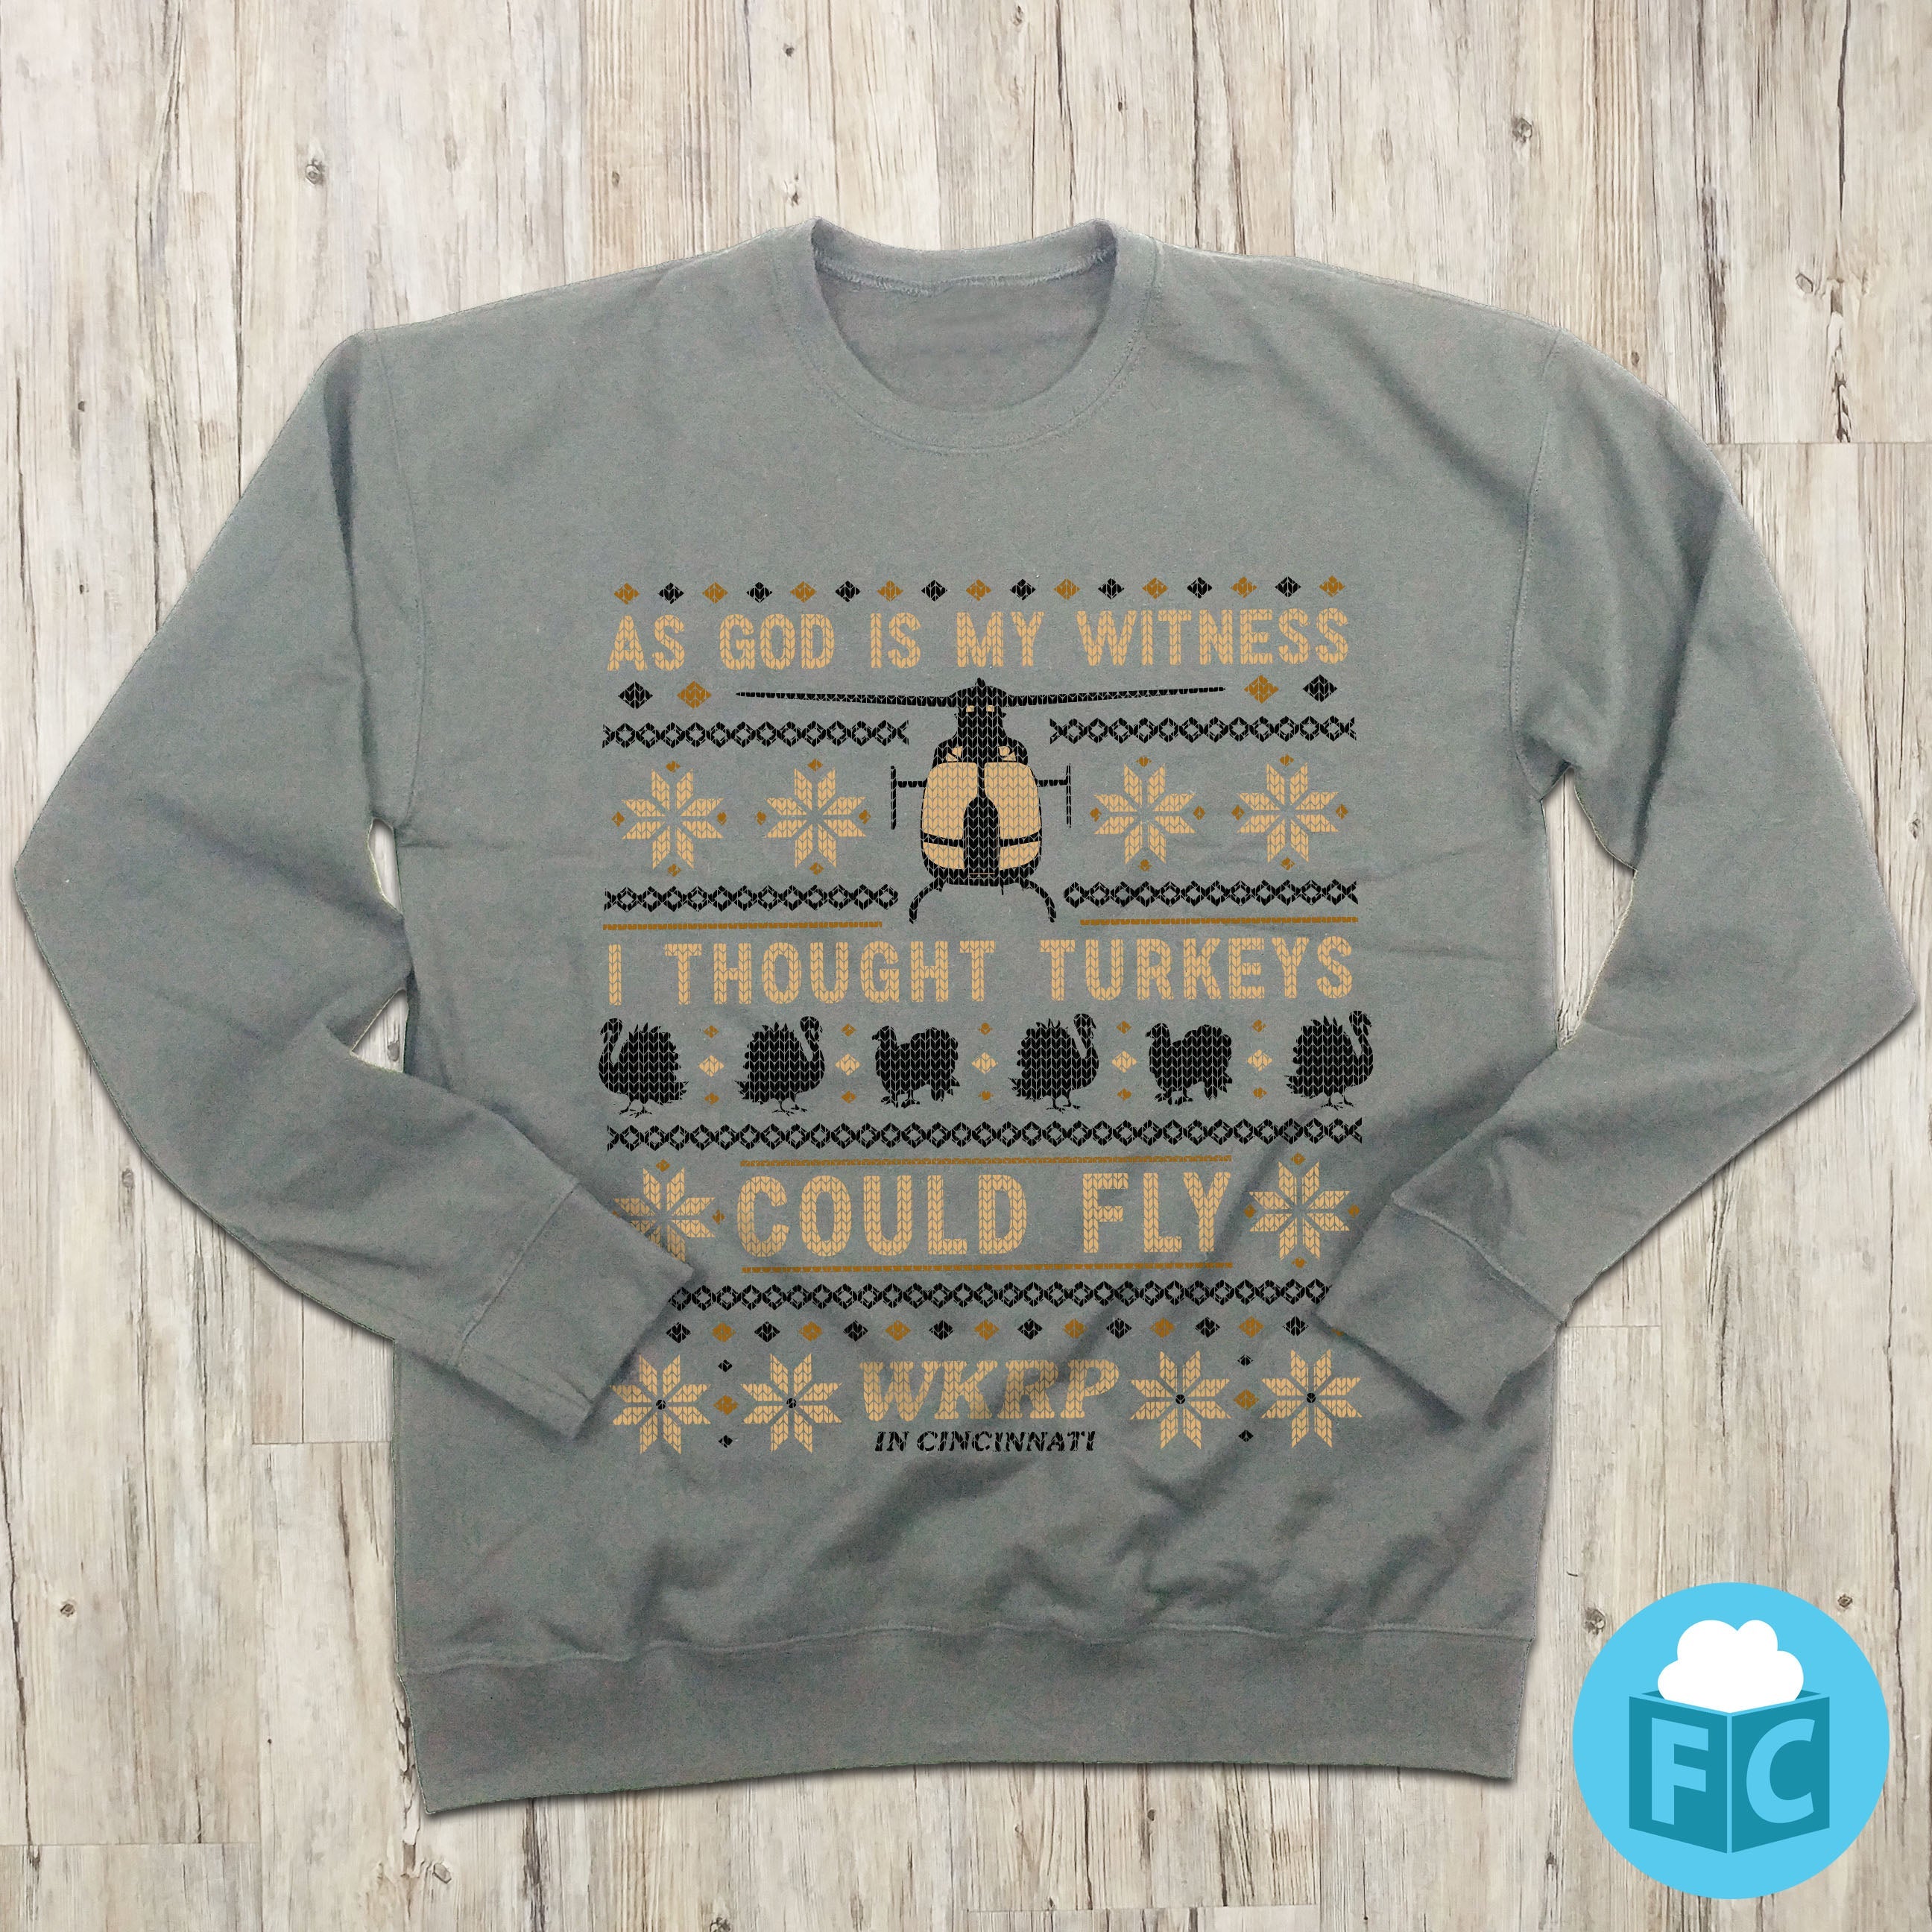 WKRP "I Thought Turkeys Could Fly" Ugly Christmas Sweatshirt